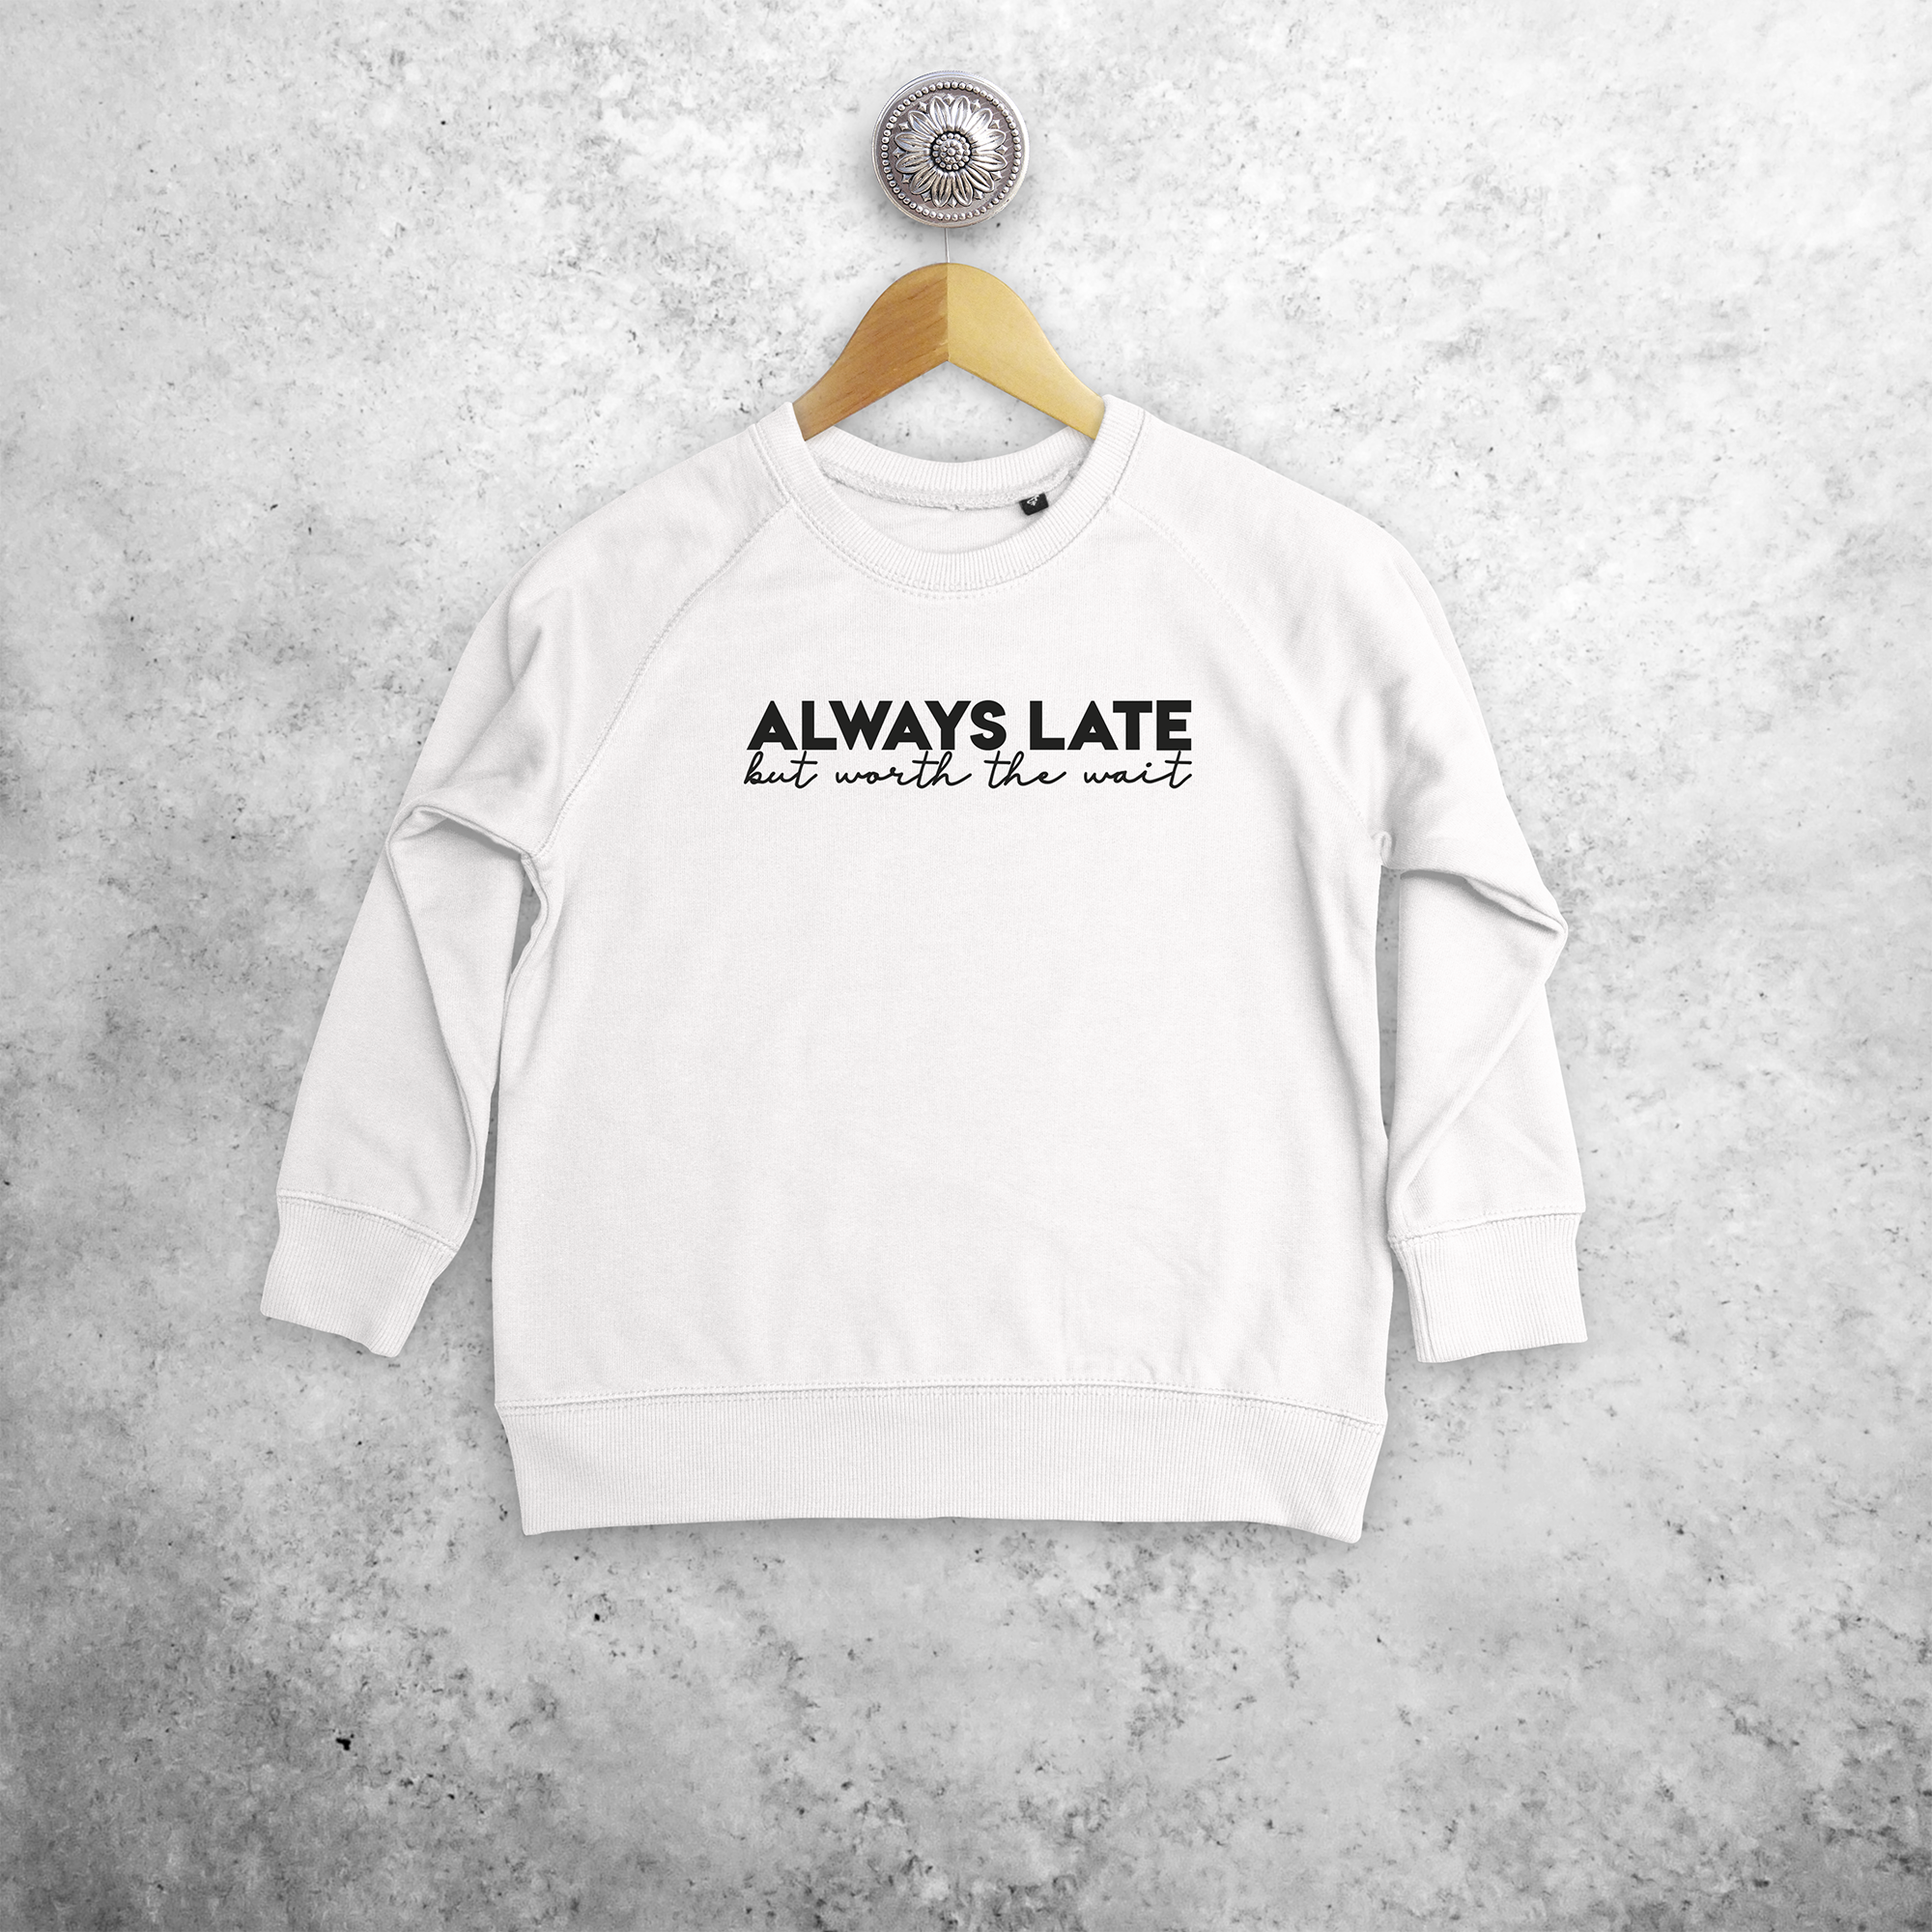 'Always late, but worth the wait' kids sweater